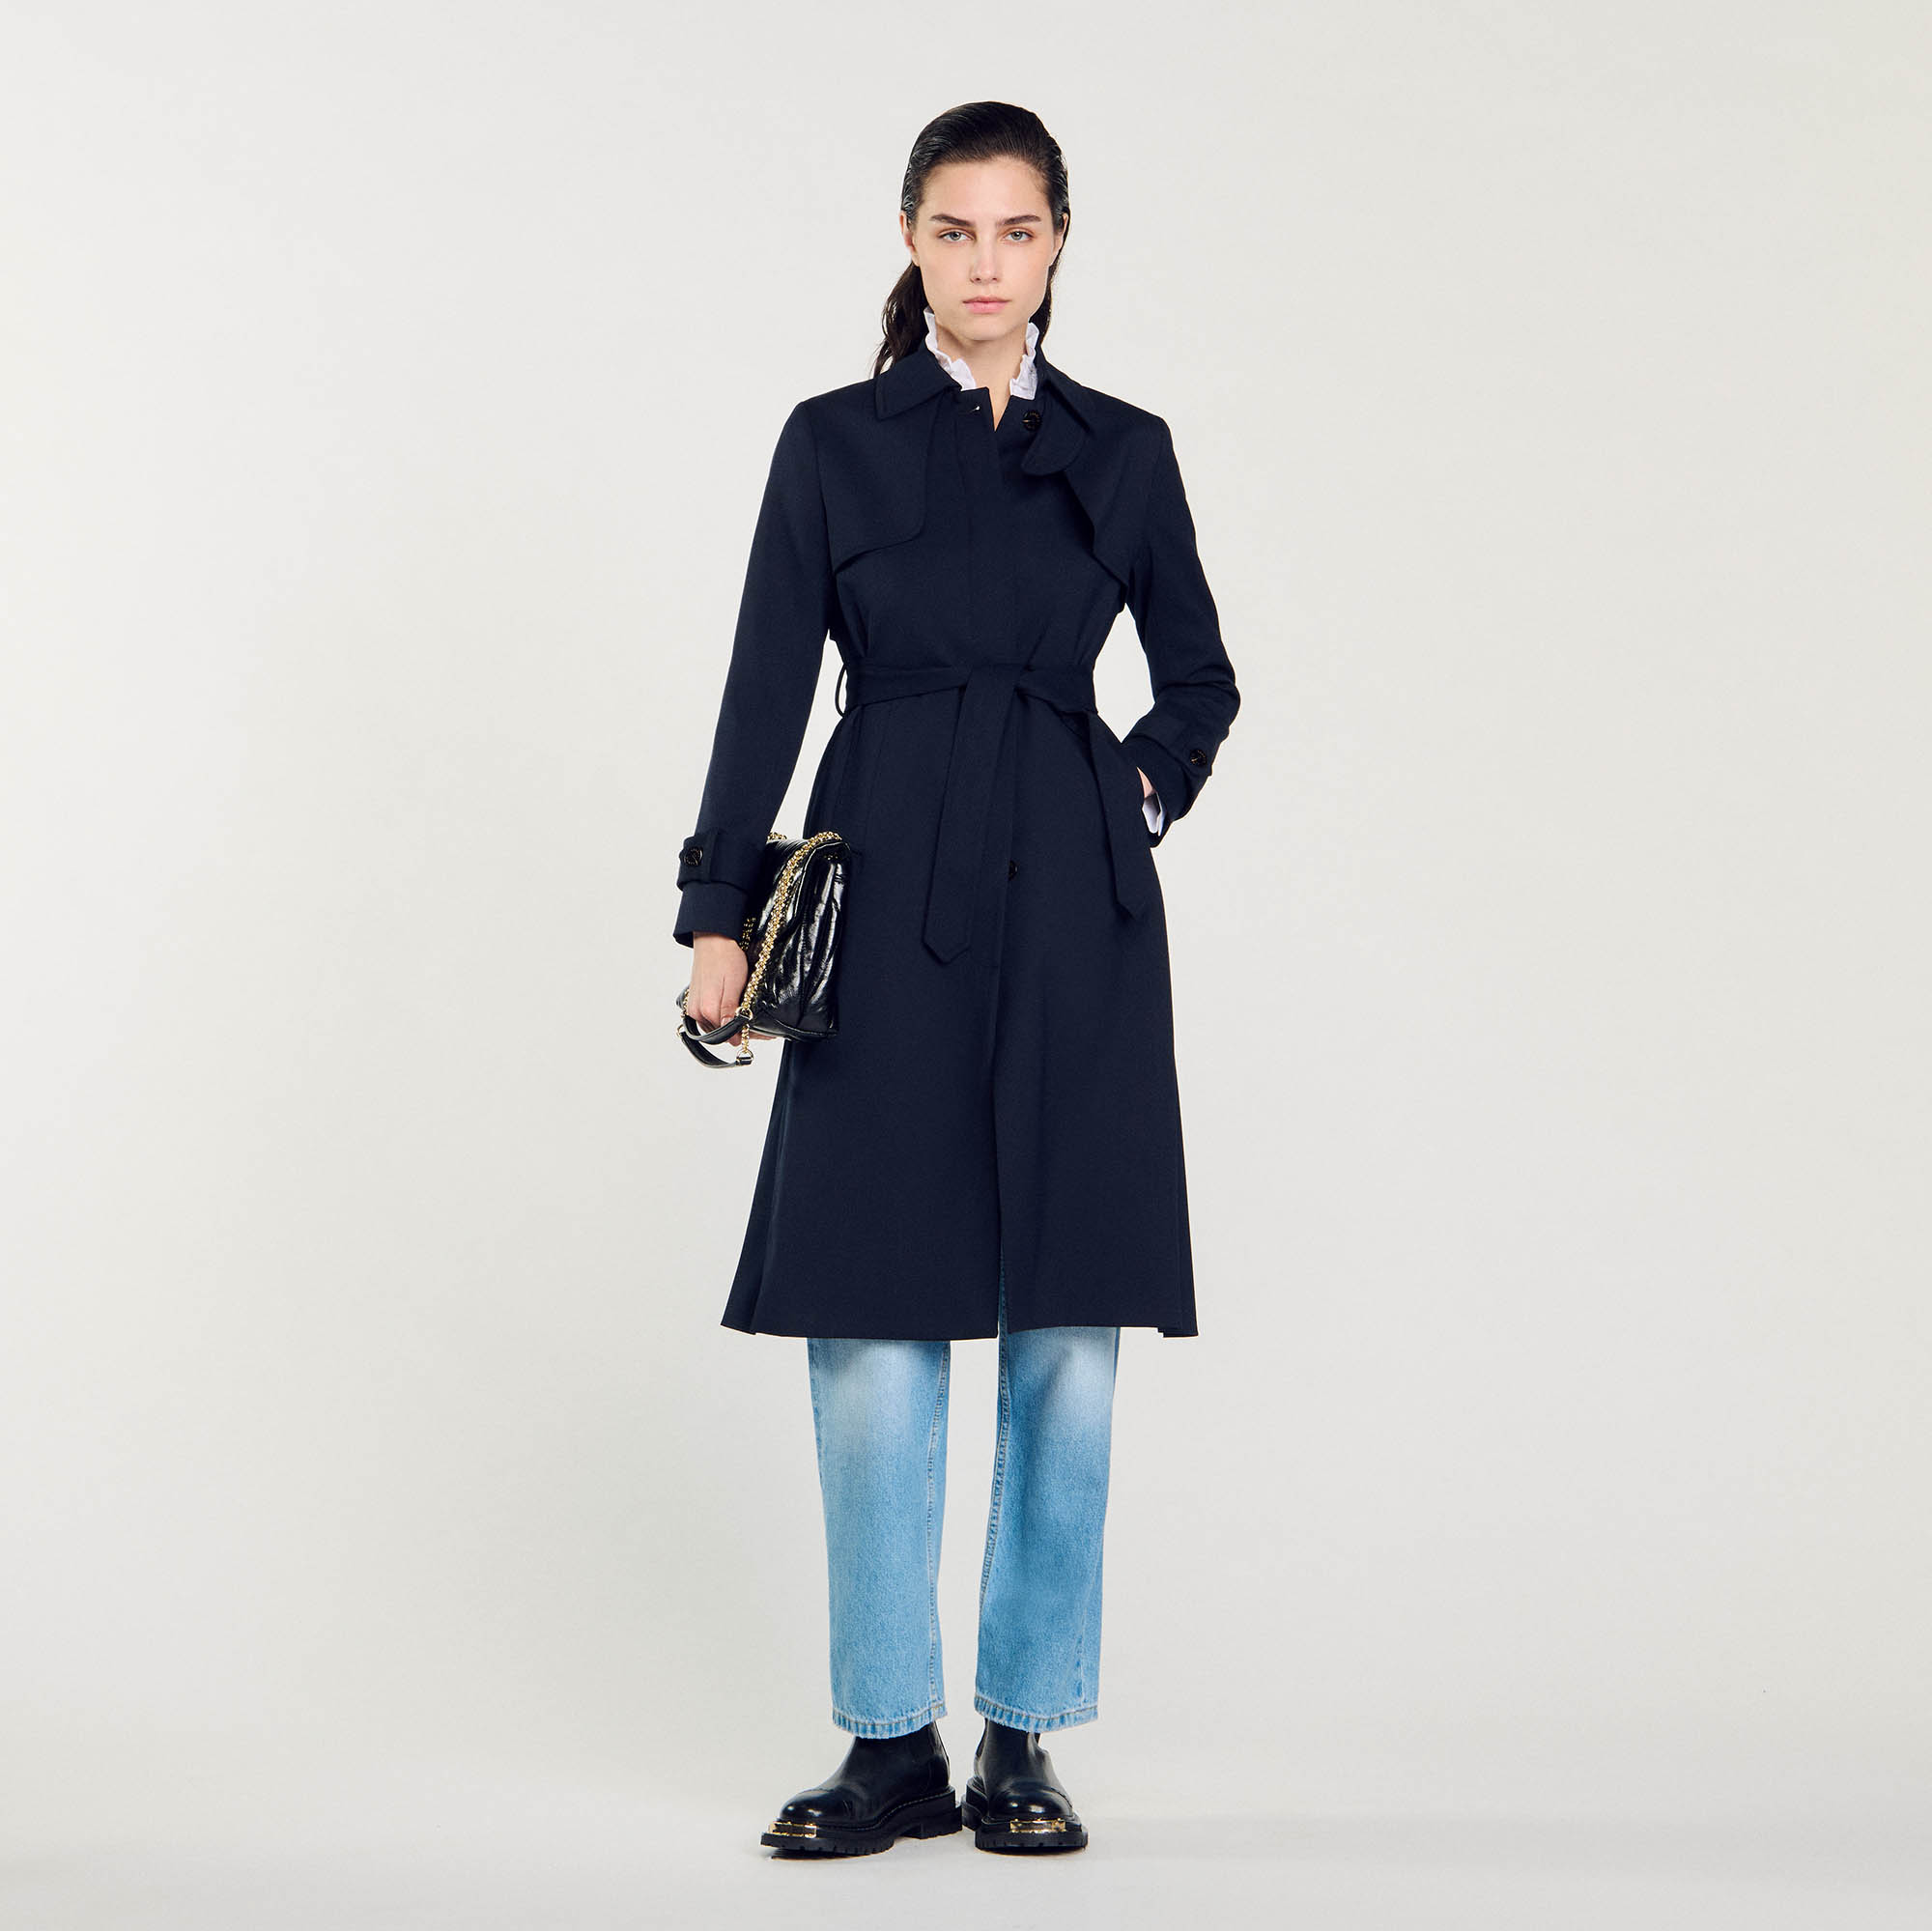 Sandro polyester Sandro women's trench coat â€¢ Trench coat with pleated inset at the back â€¢ Two slanted pockets â€¢ Tie belt â€¢ Sandro branded press studs â€¢ Storm flap